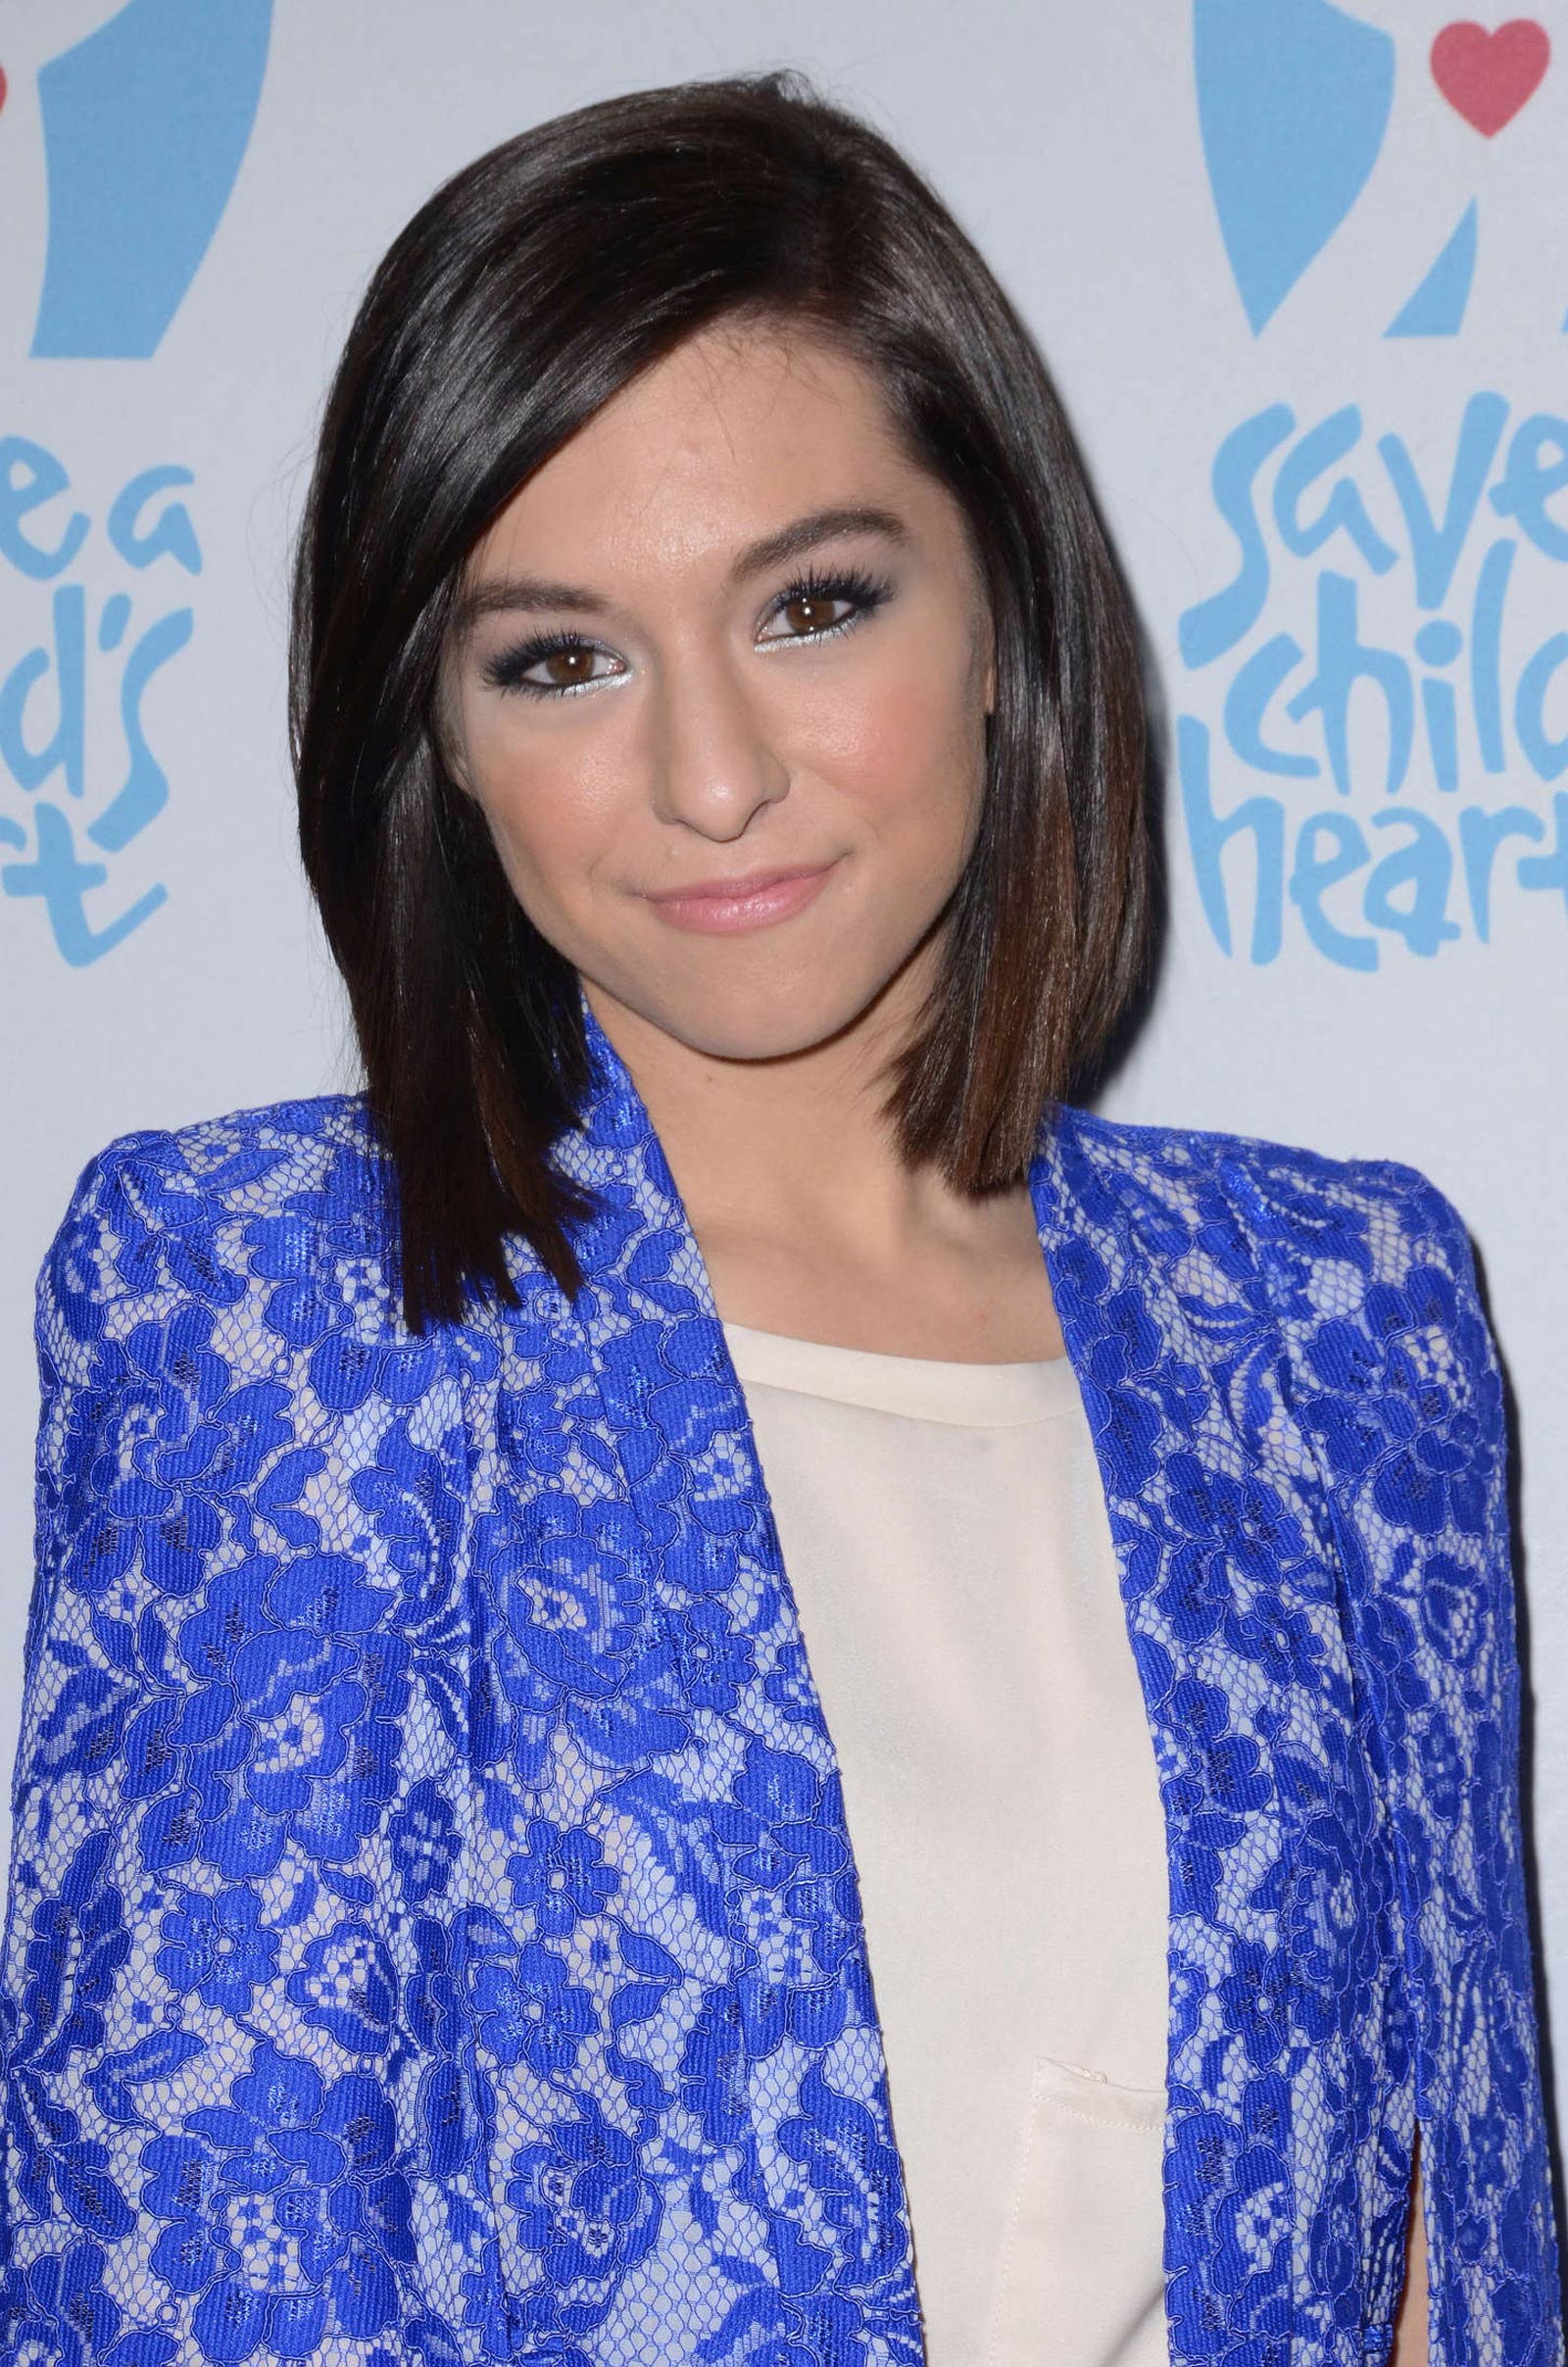 Christina Grimmie attends 2nd Annual Save a Child’s Heart Gala